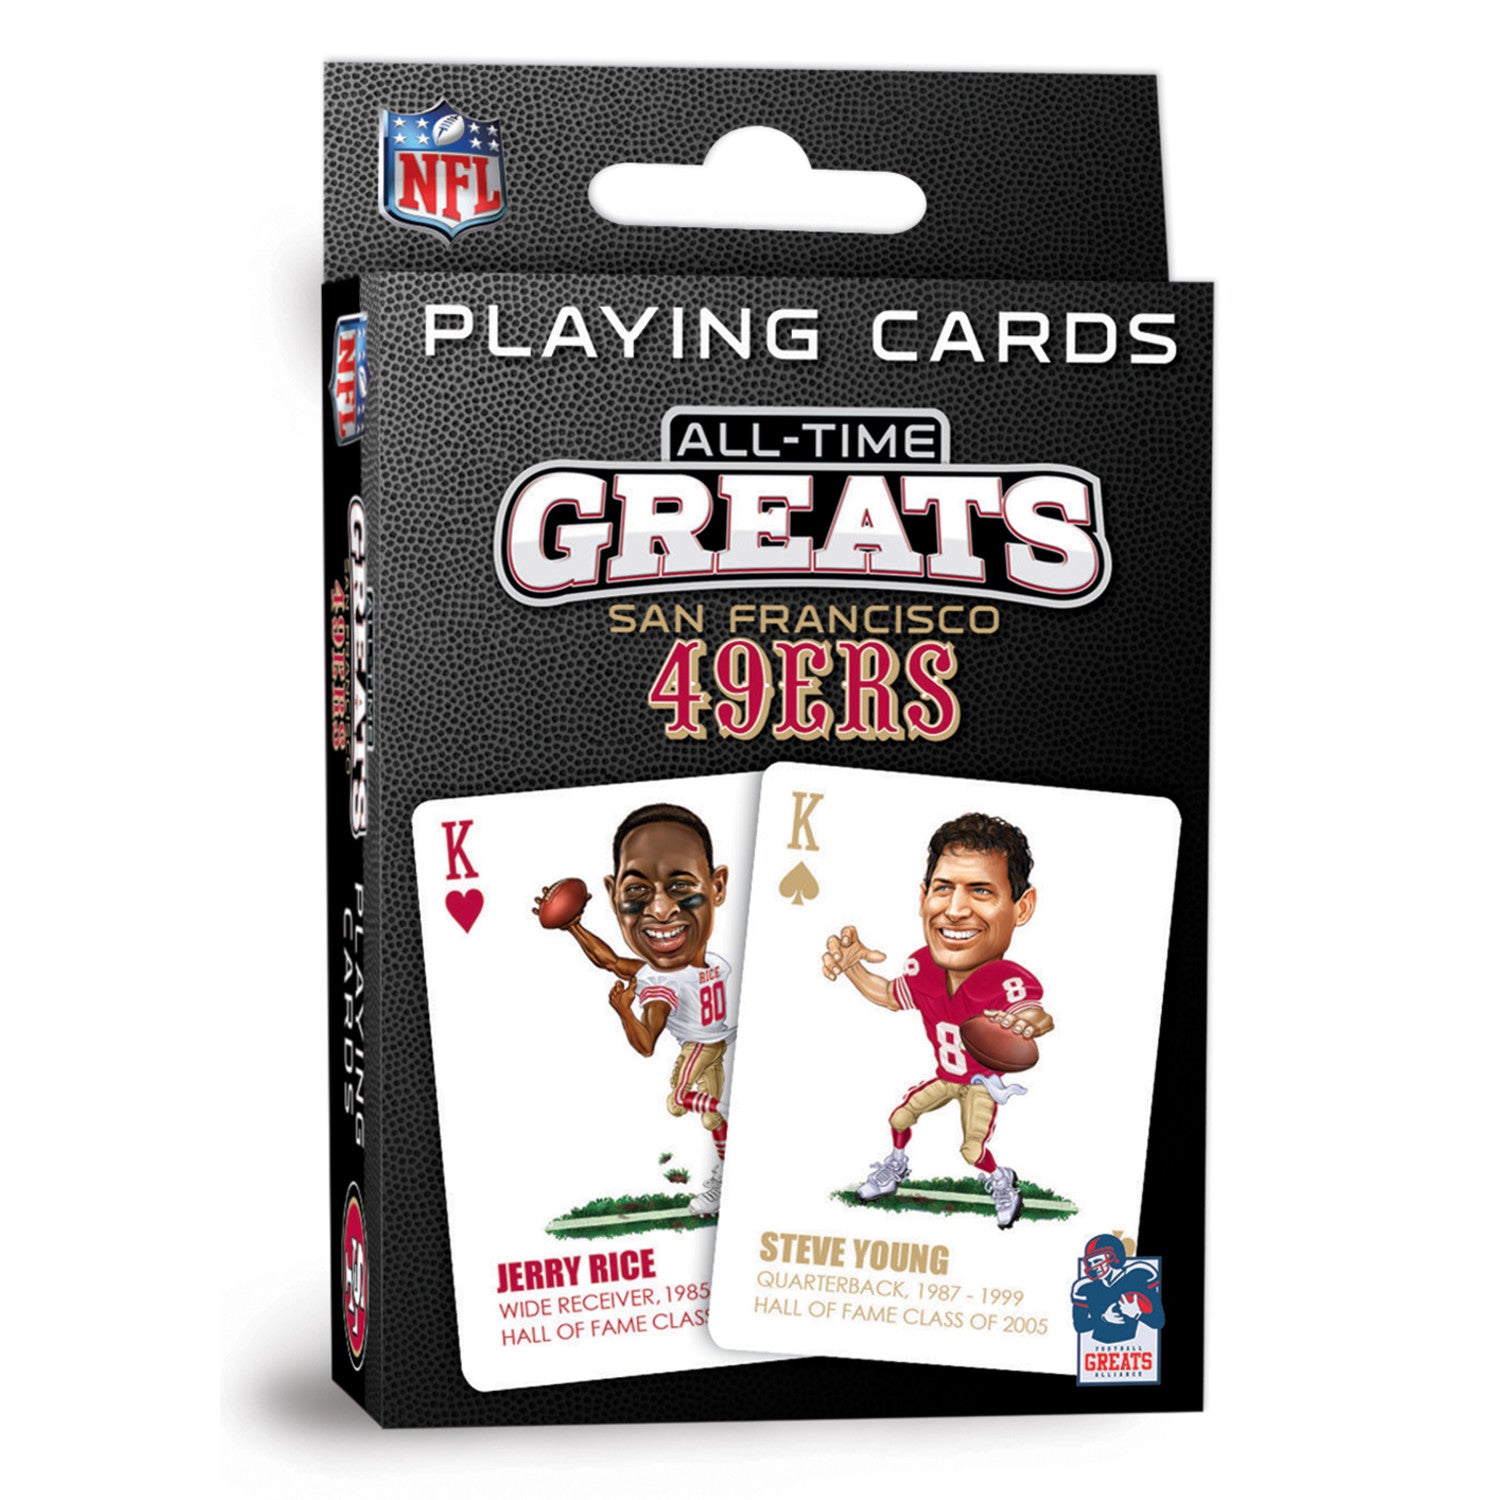 San Francisco 49ers All-Time Greats Playing Cards